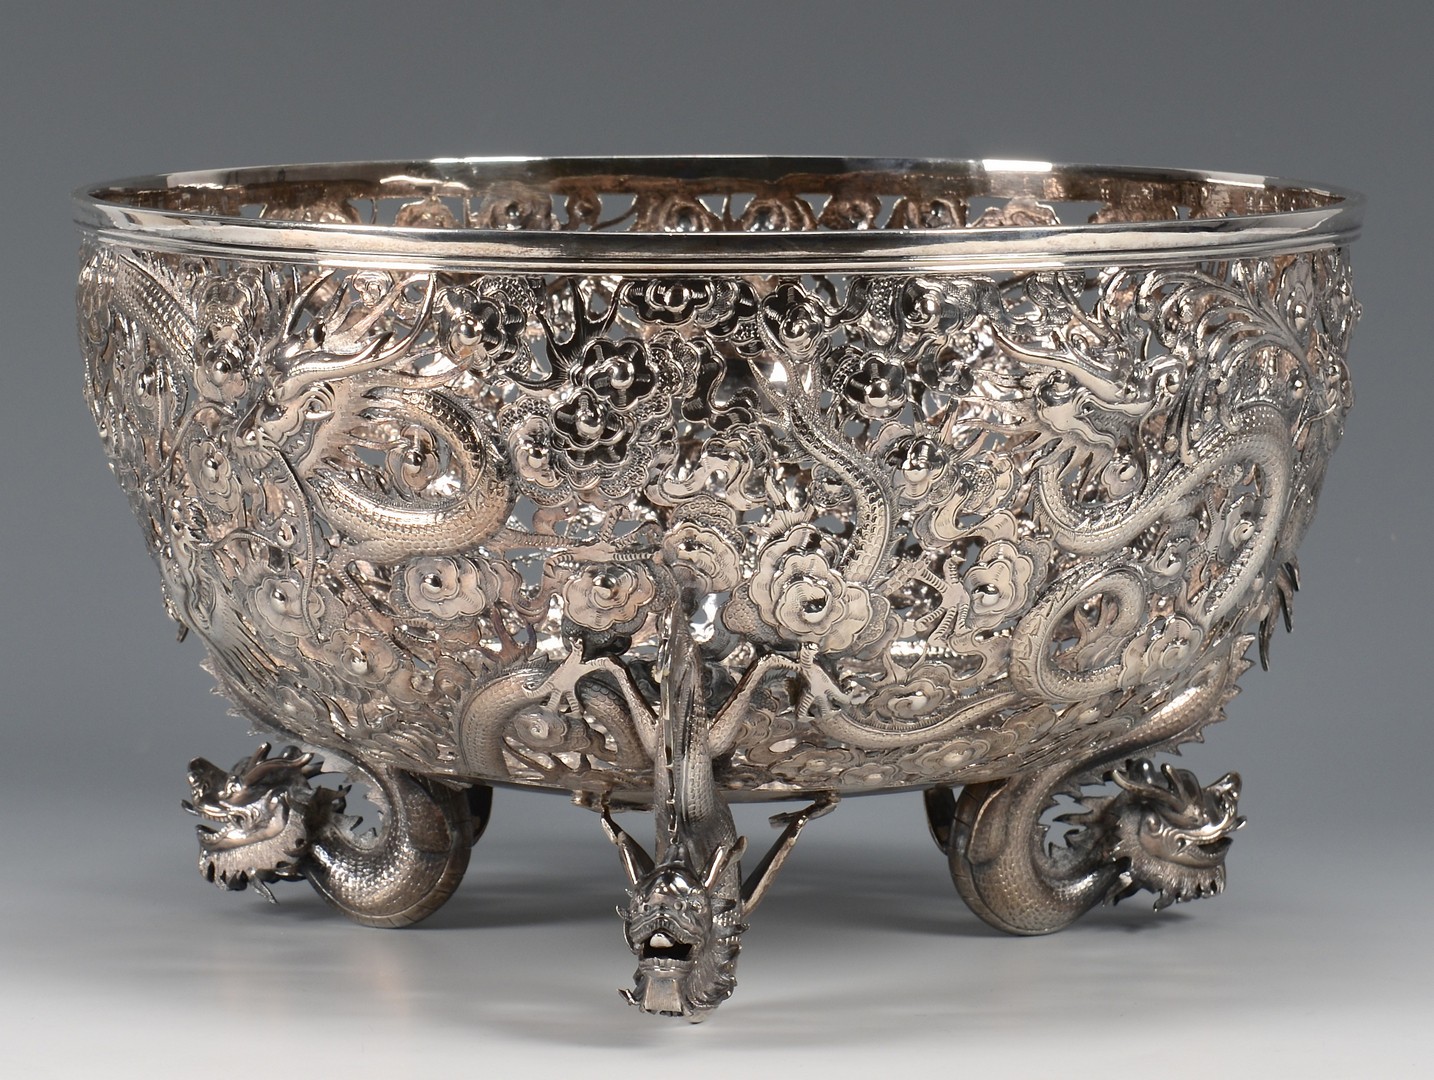 Lot 4: Large Chinese Export Silver Dragon Bowl